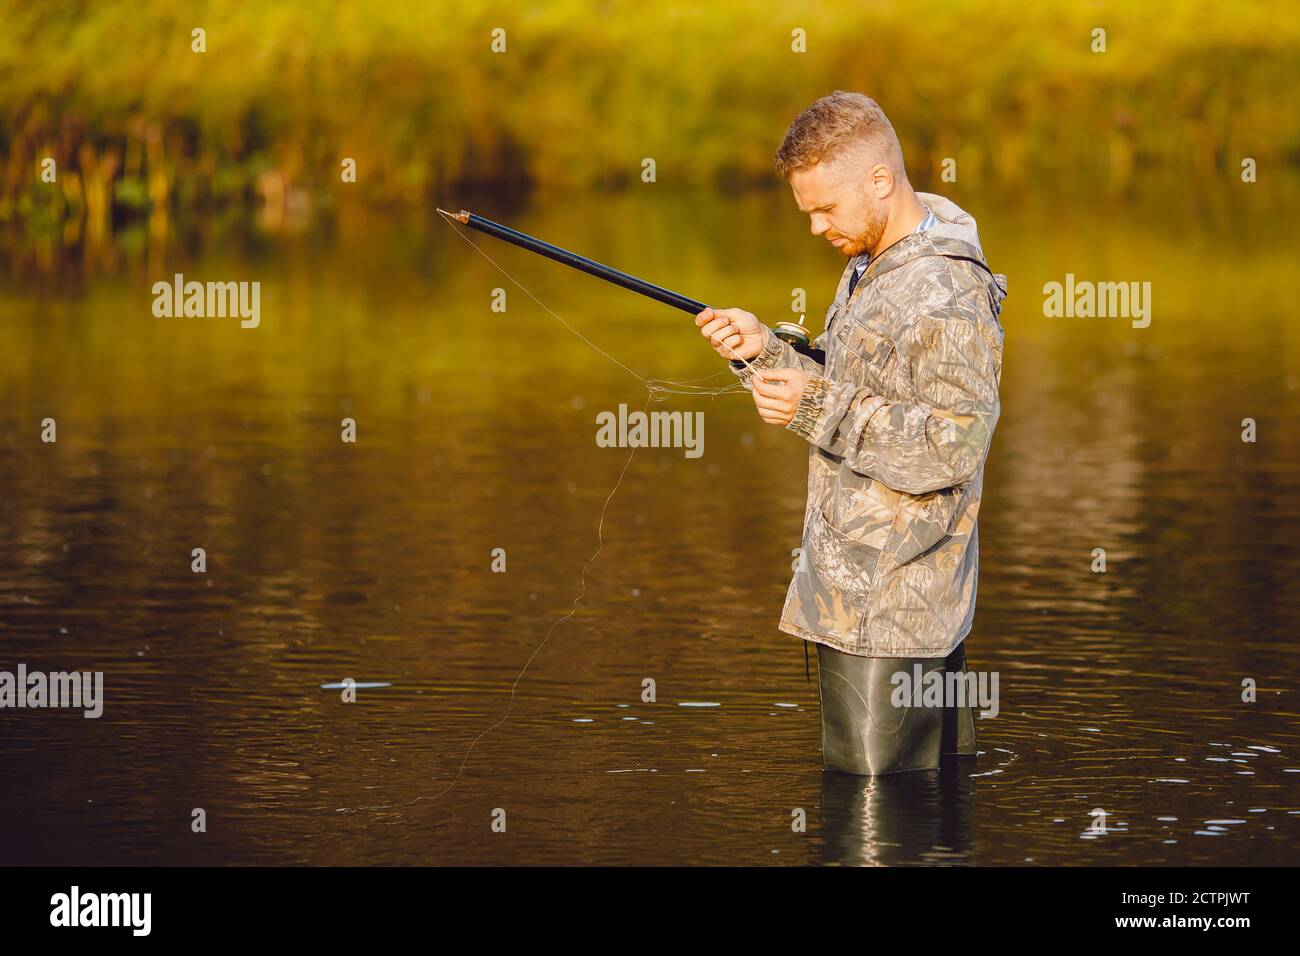 Eliminates High Resolution Stock Photography and Images - Alamy